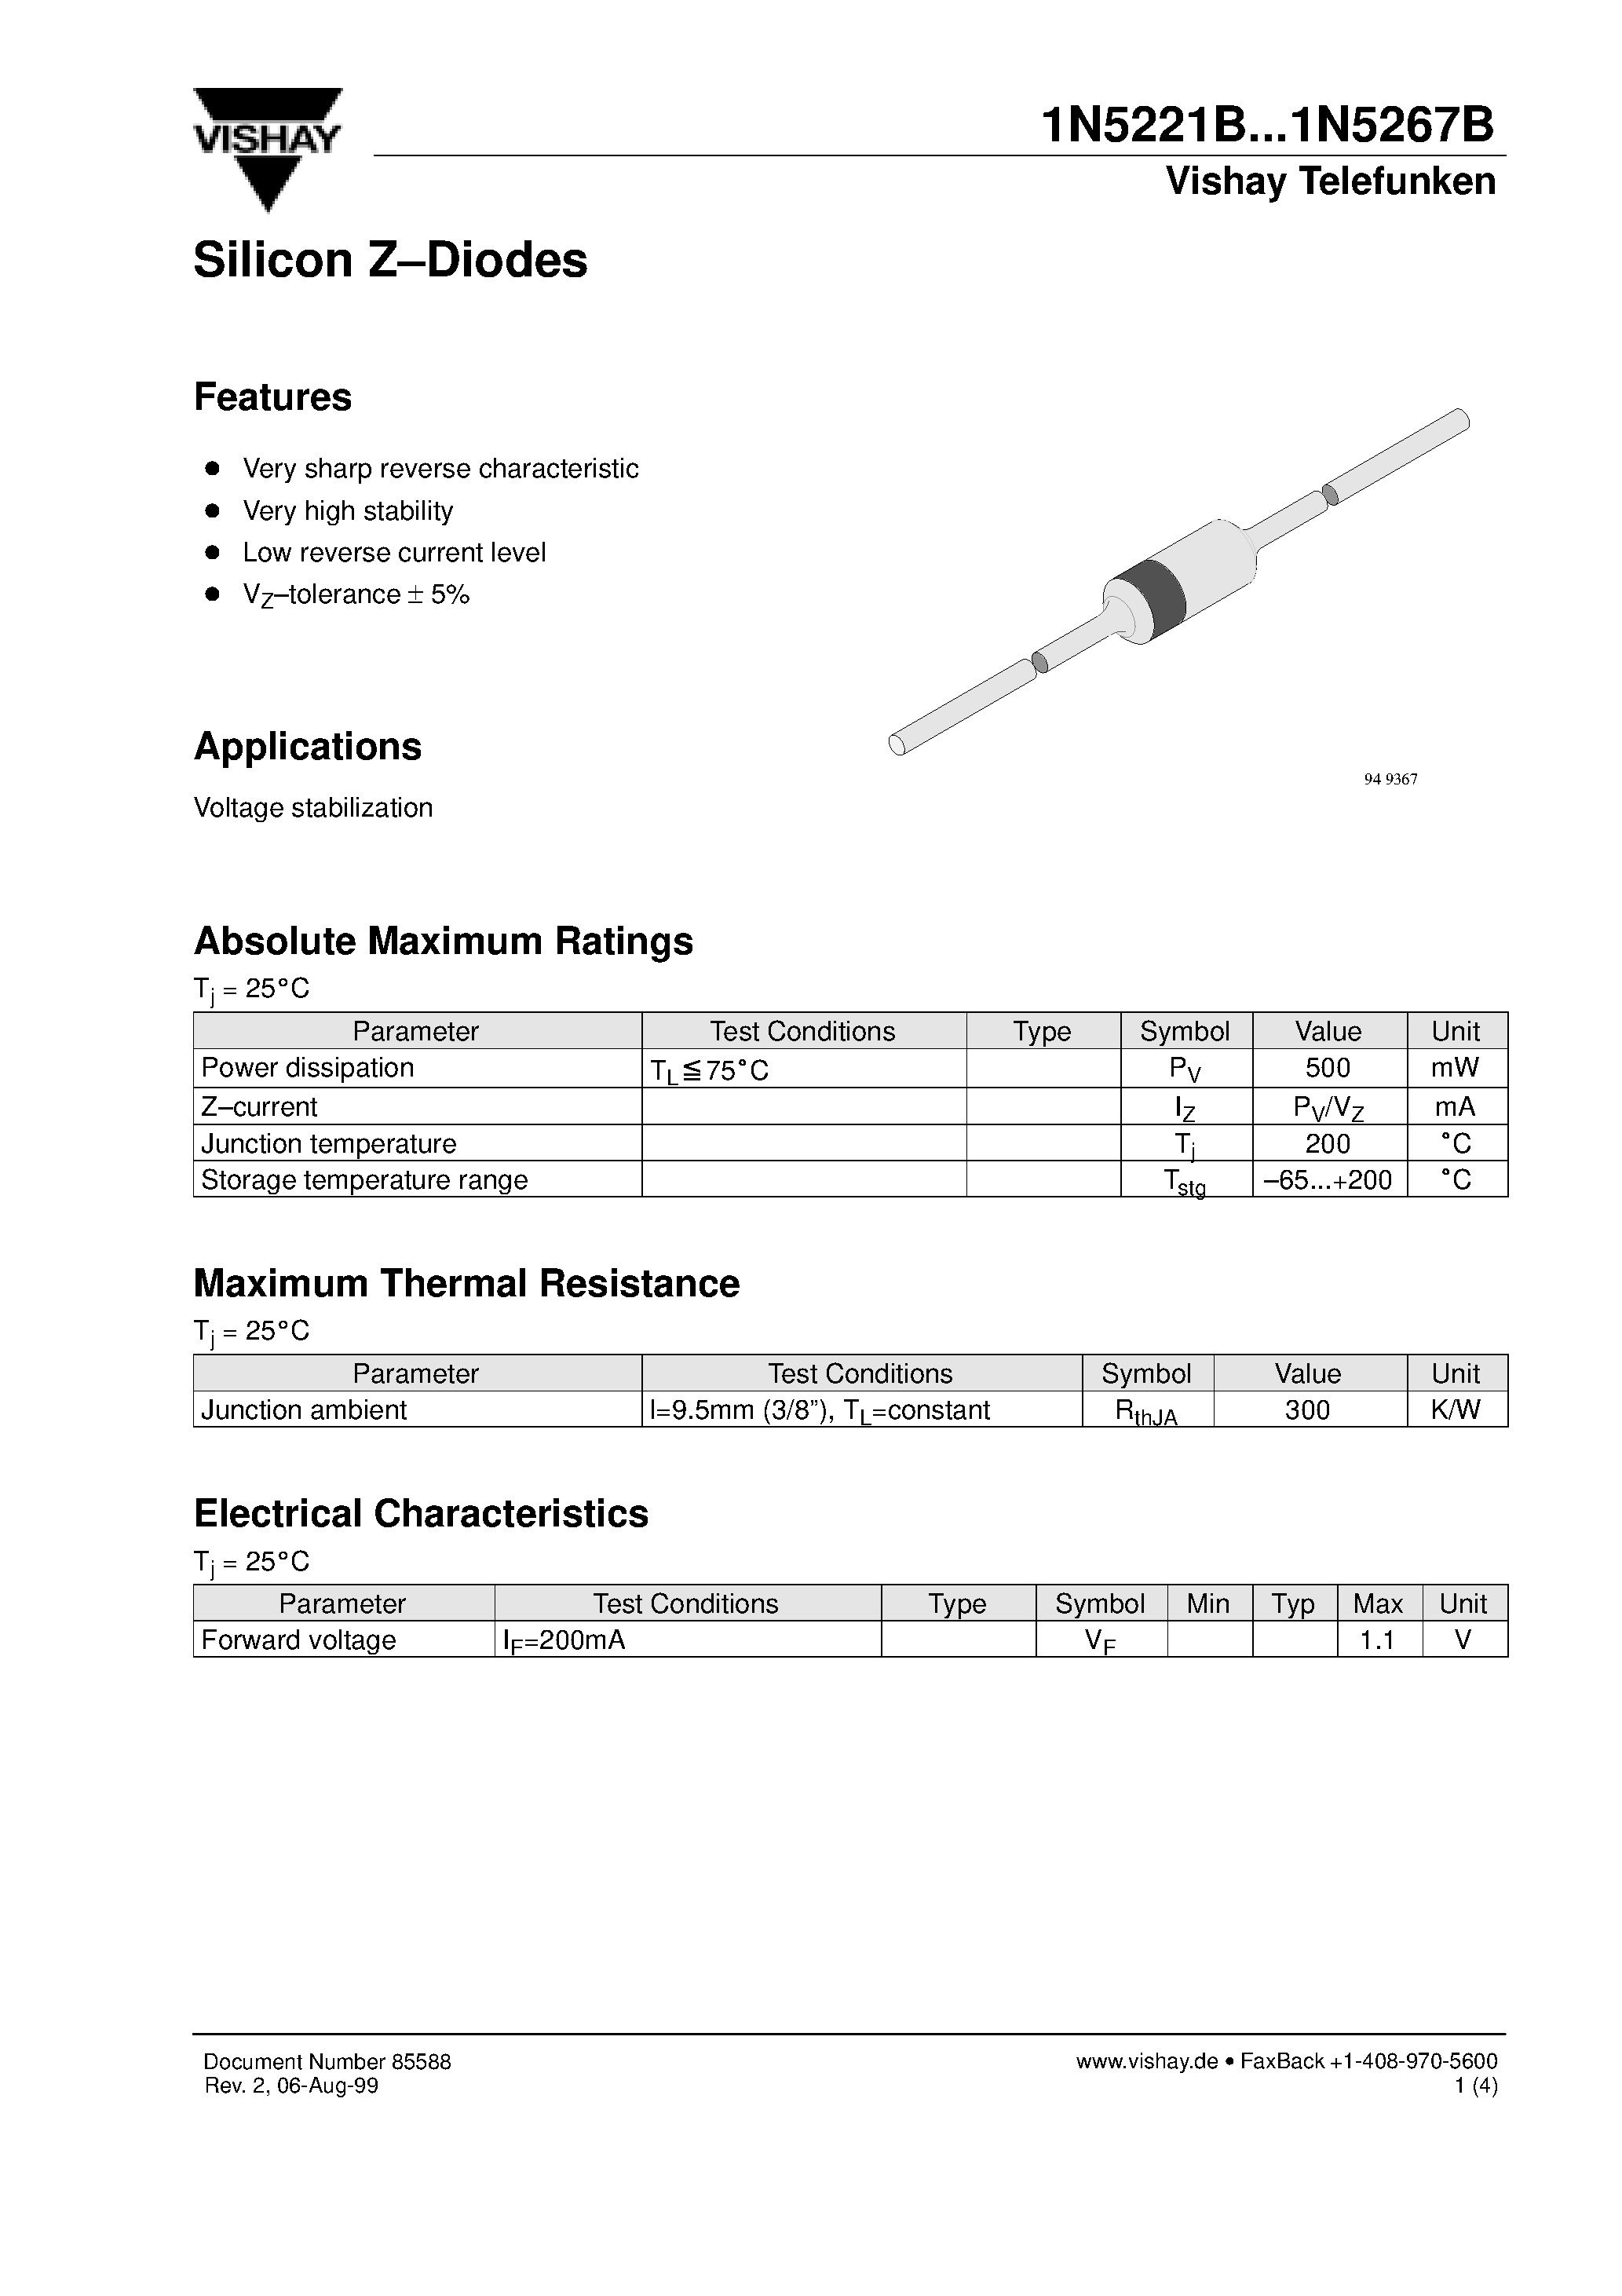 Datasheet 1N5249B - Silicon Z-Diodes page 1